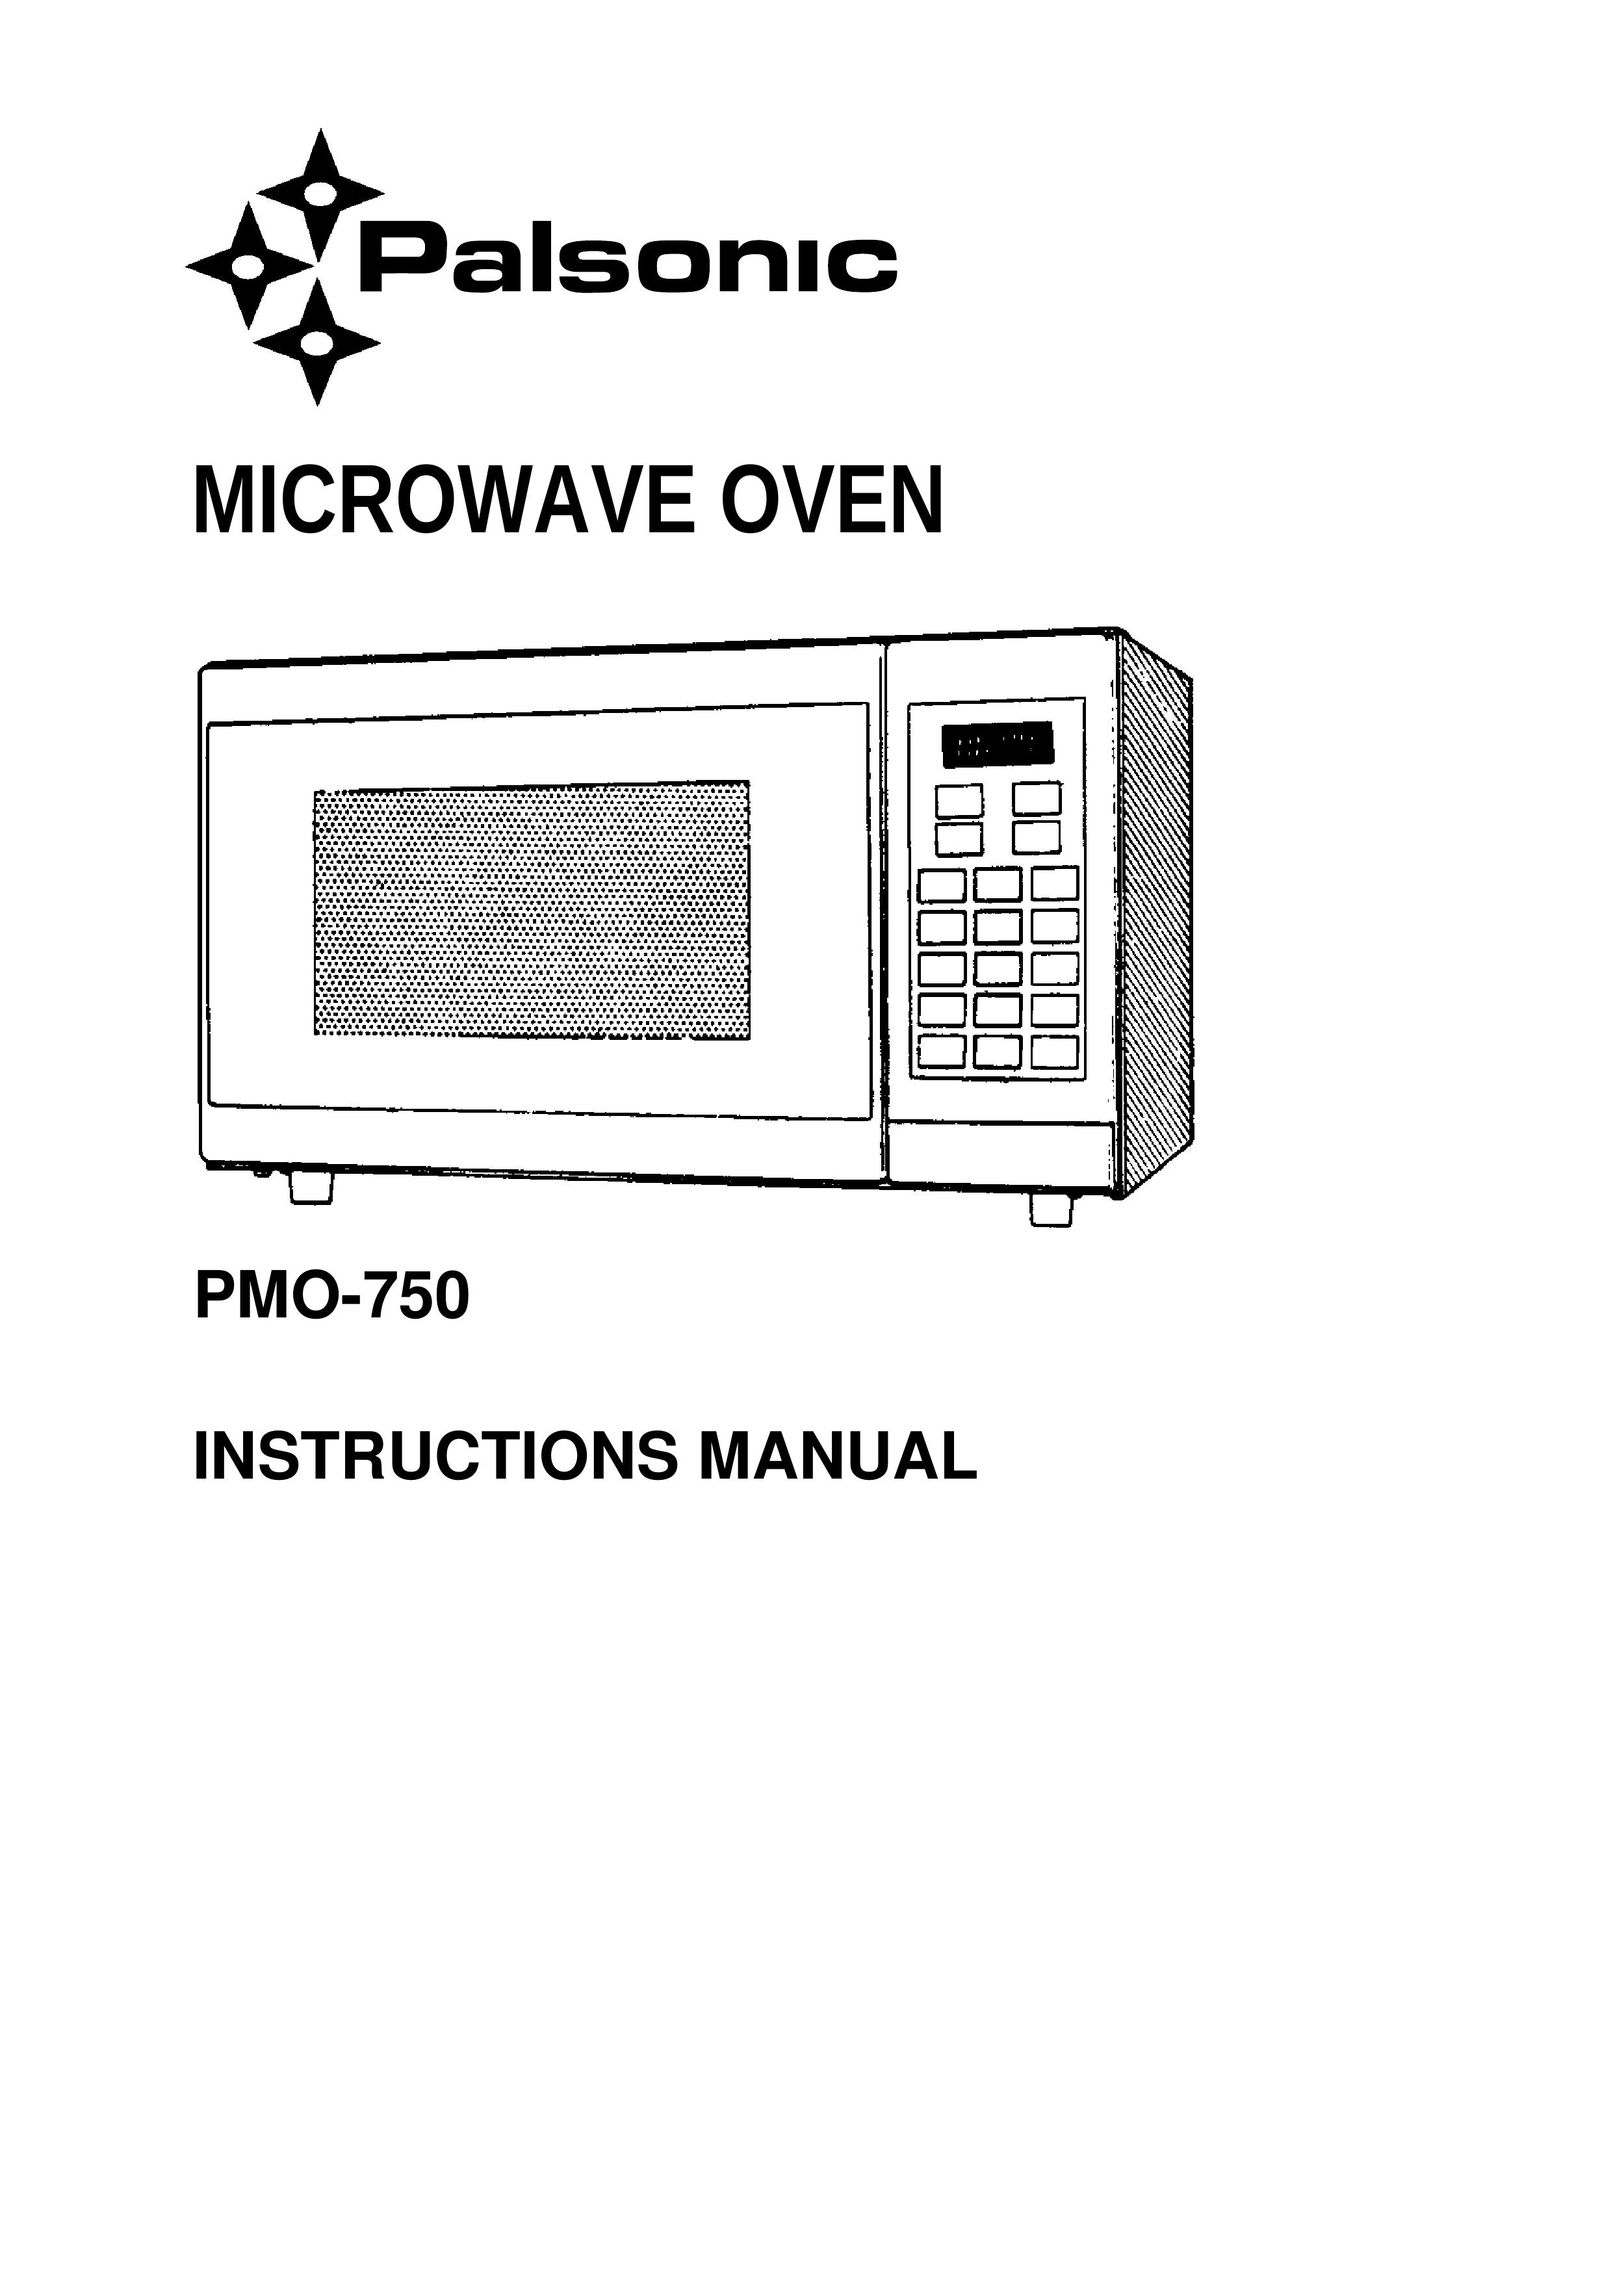 Palsonic PMO-750 Microwave Oven User Manual